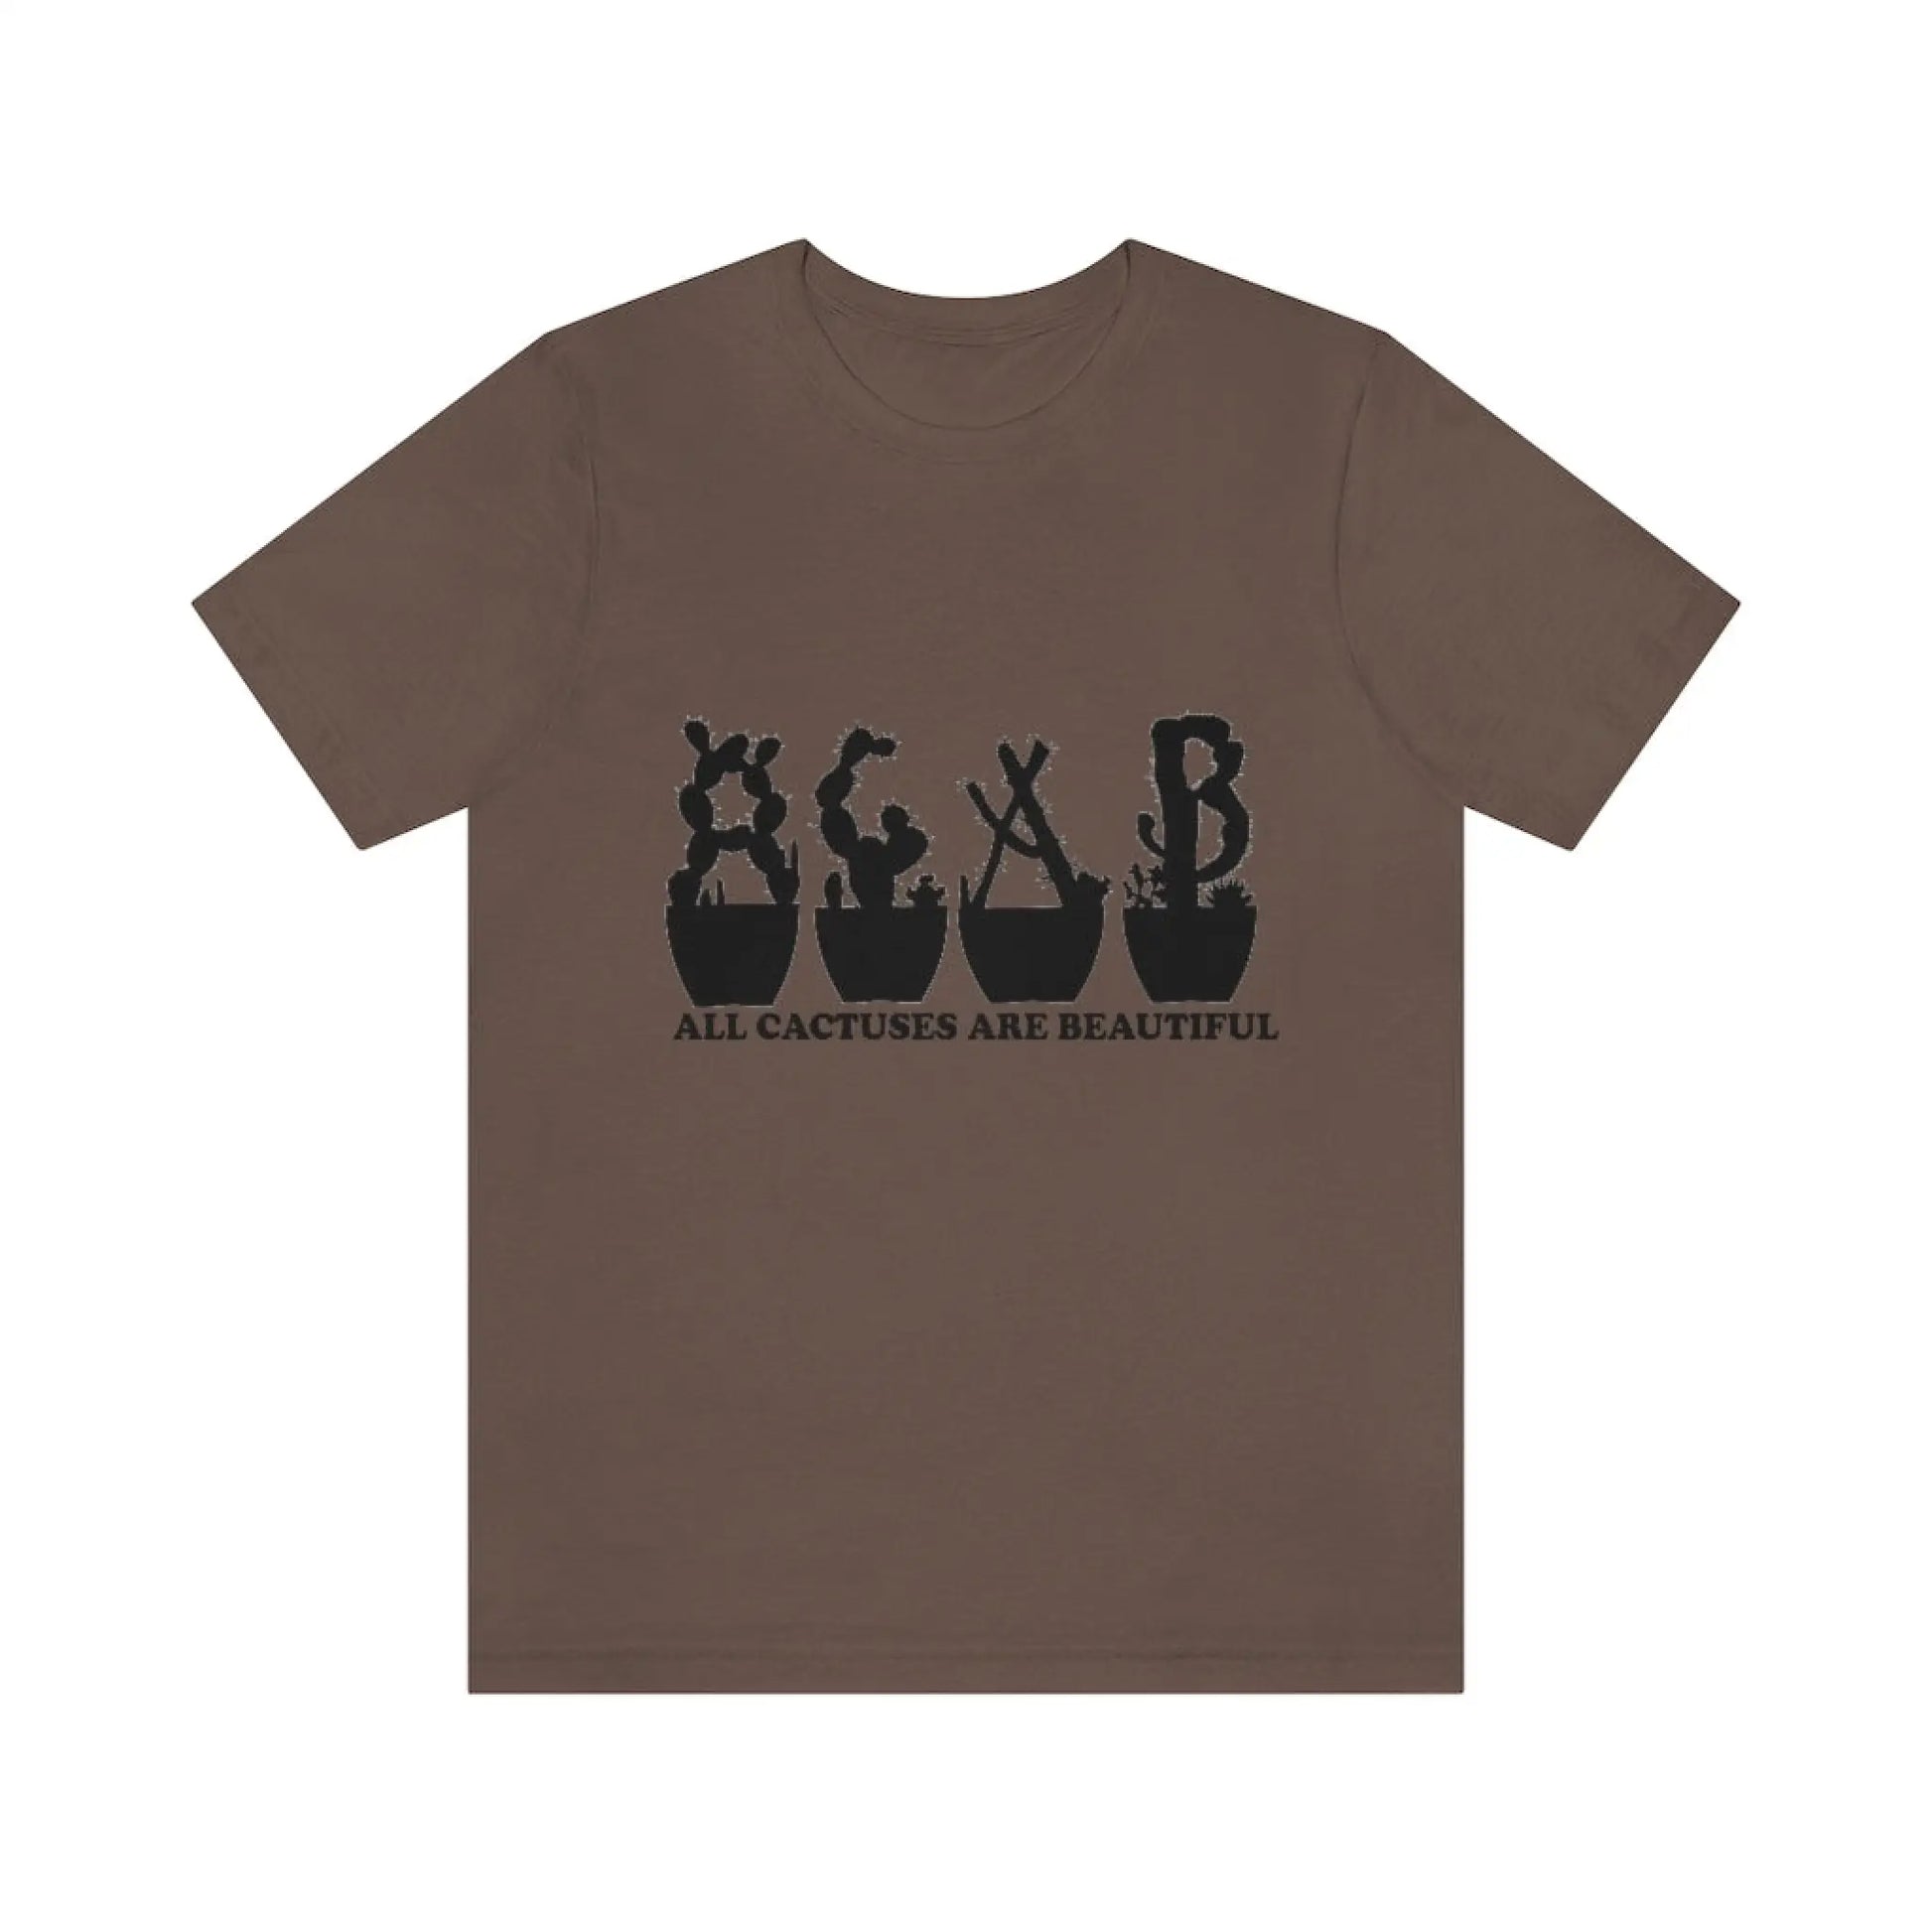 Shirts - All Cactuses Are Beautiful - Brown / S - T-Shirt